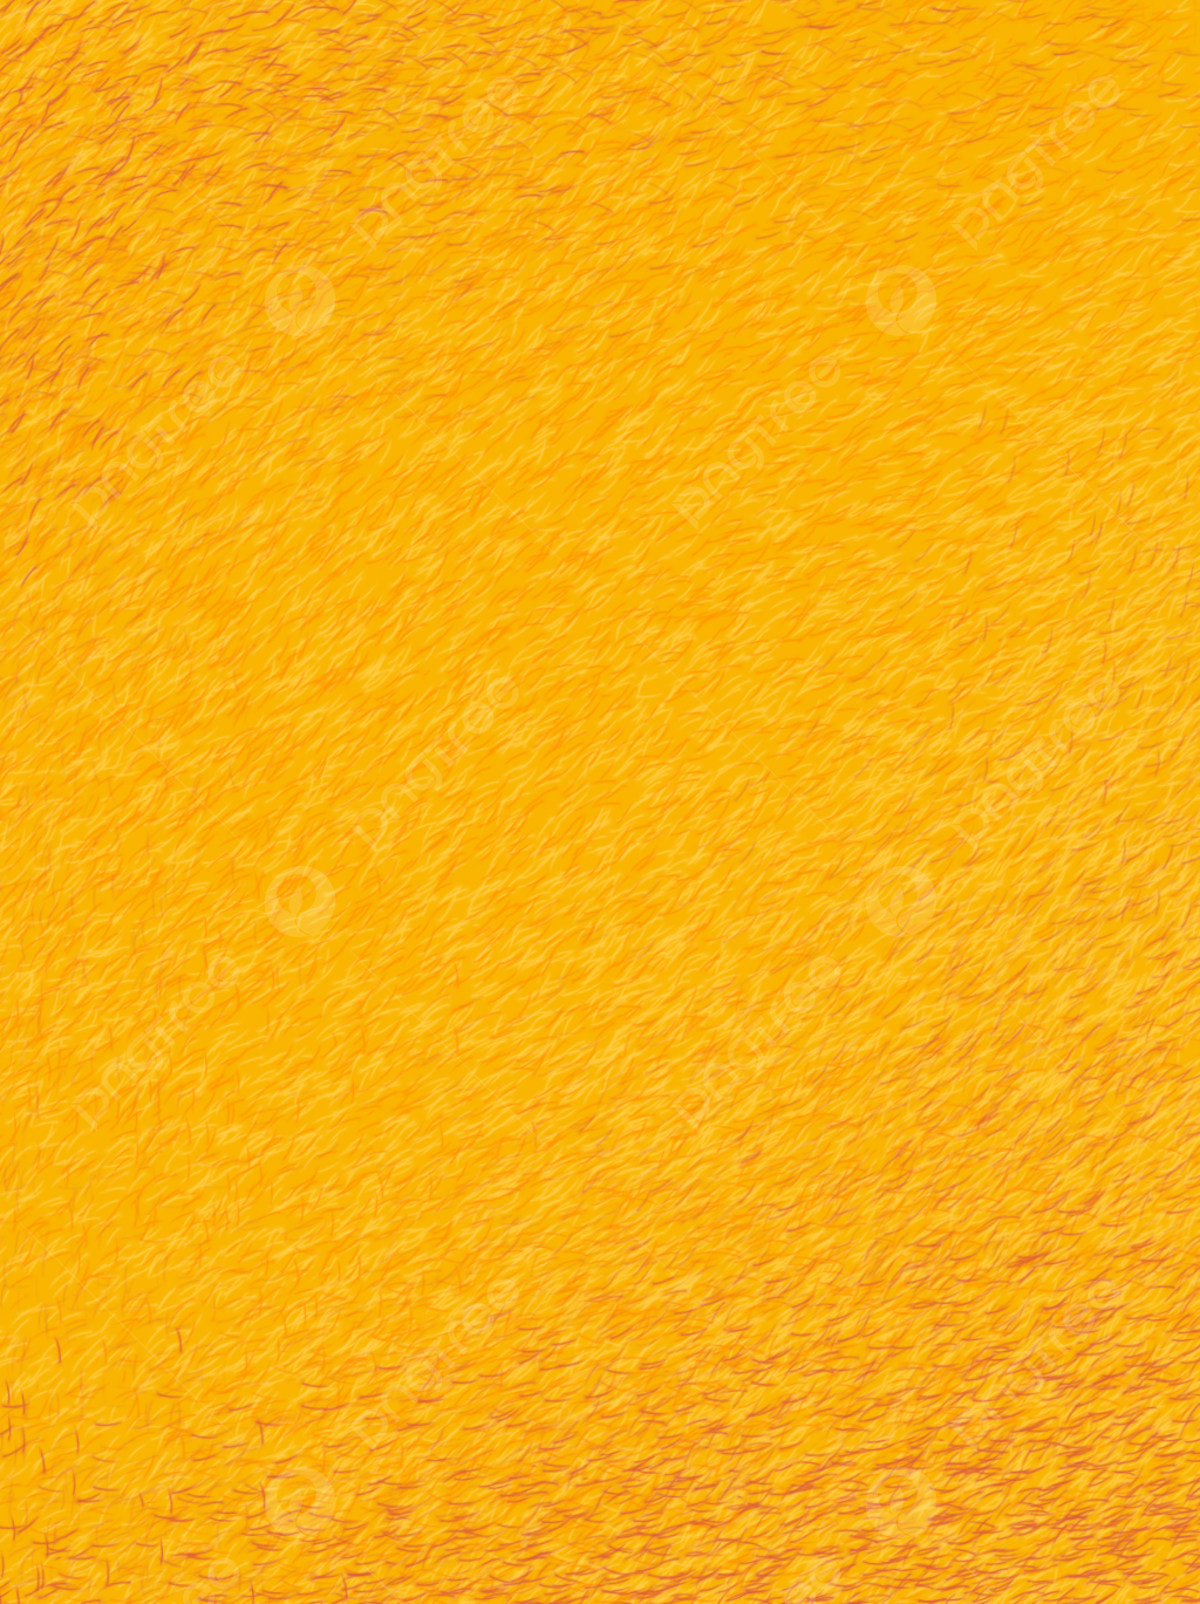 Solid Yellow Background